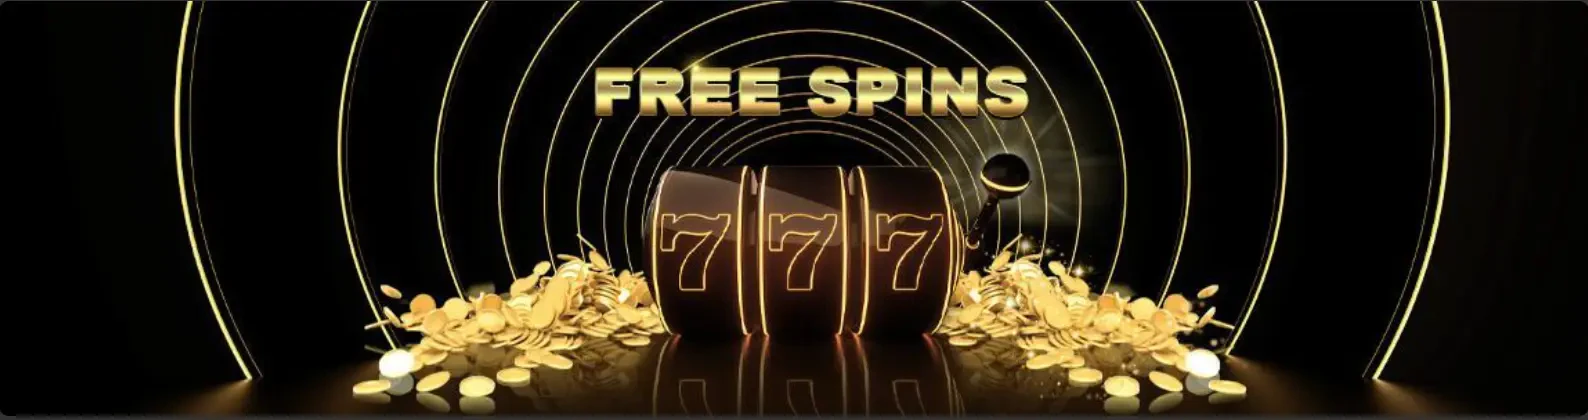 woopwin free spins